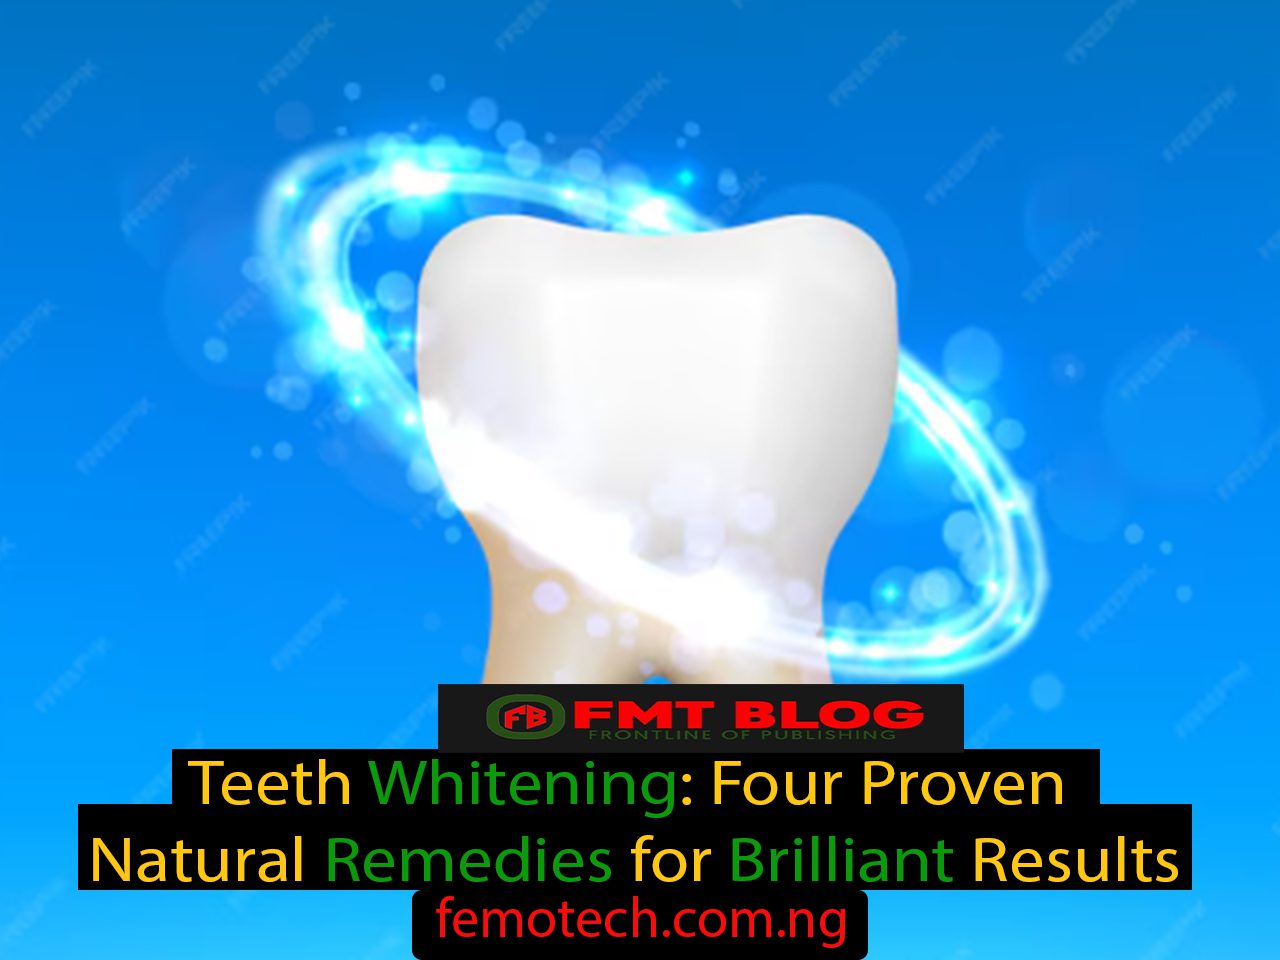 Teeth Whitening: 4 Proven Natural Remedies for Brilliant Results